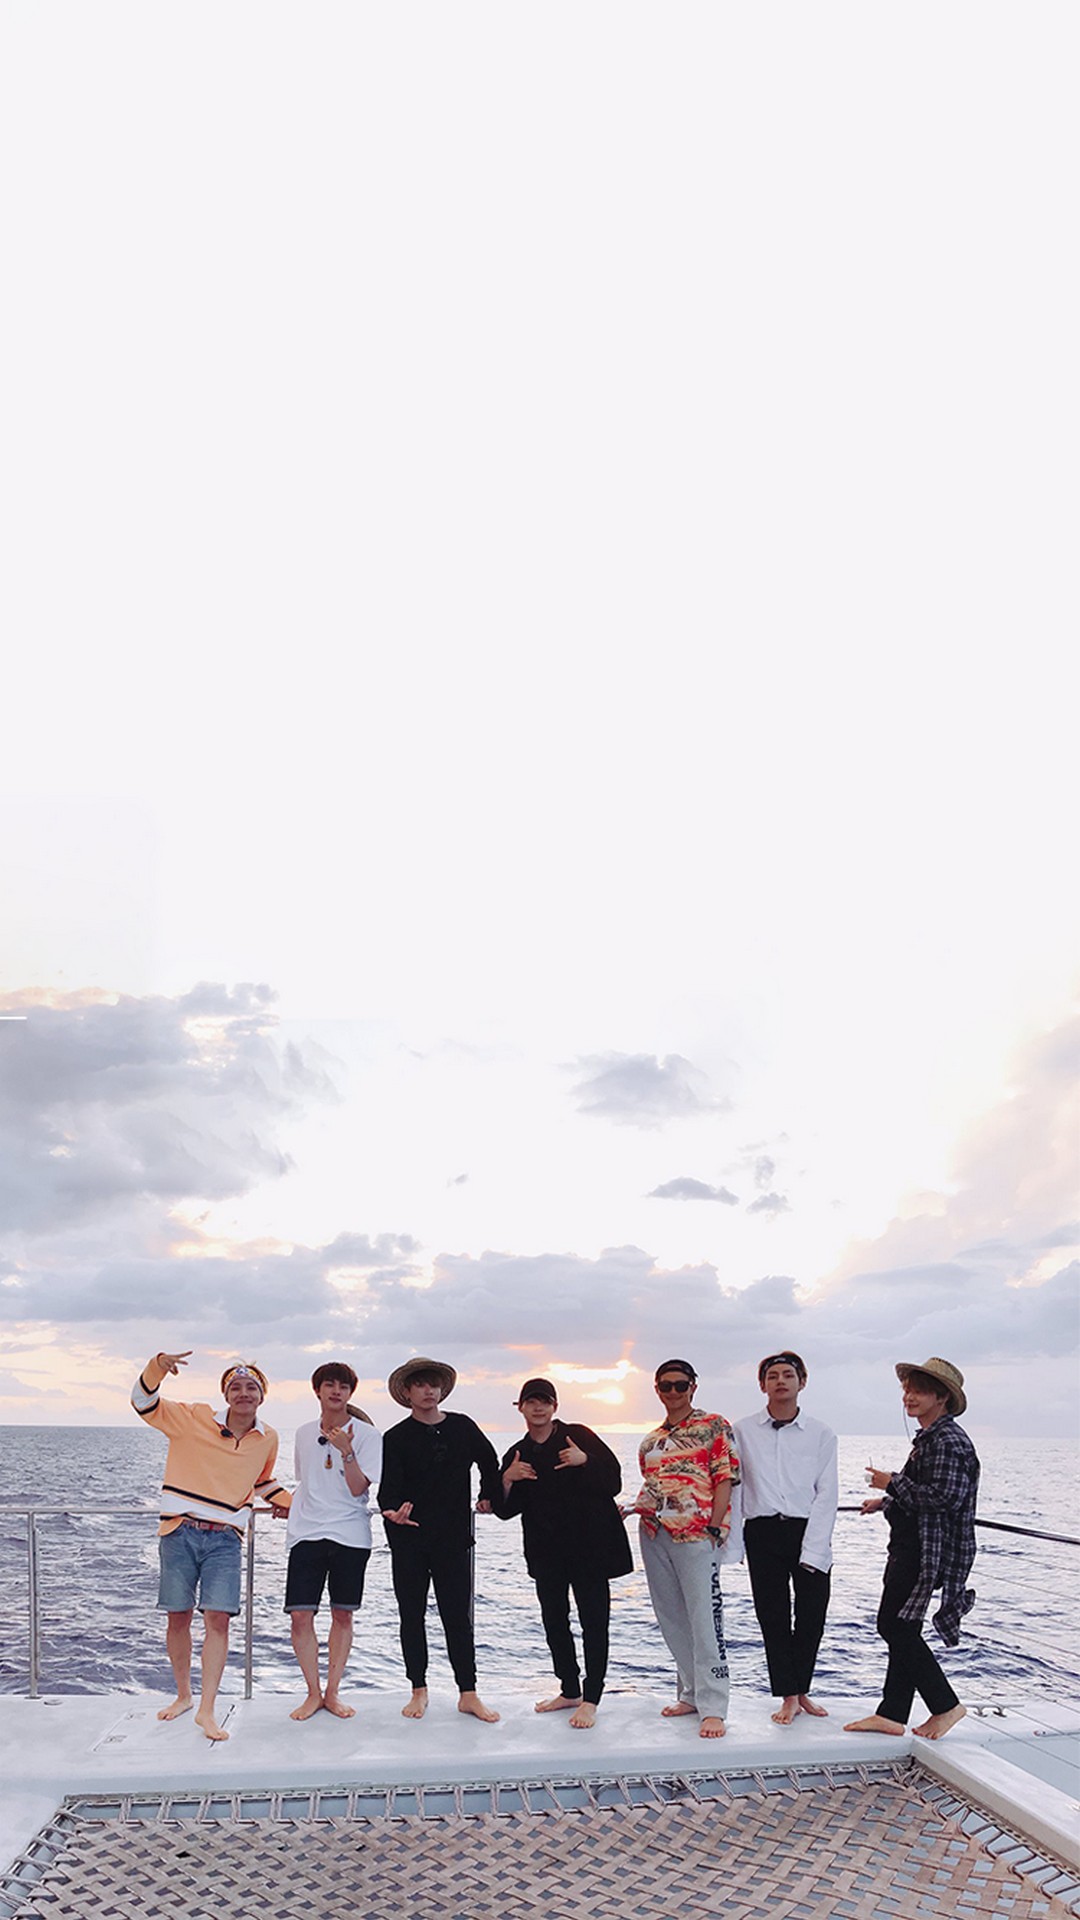 BTS iPhone X Wallpaper HD with high-resolution 1080x1920 pixel. Download all Mobile Wallpapers and Use them as wallpapers for your iPhone, Tablet, iPad, Android and other mobile devices